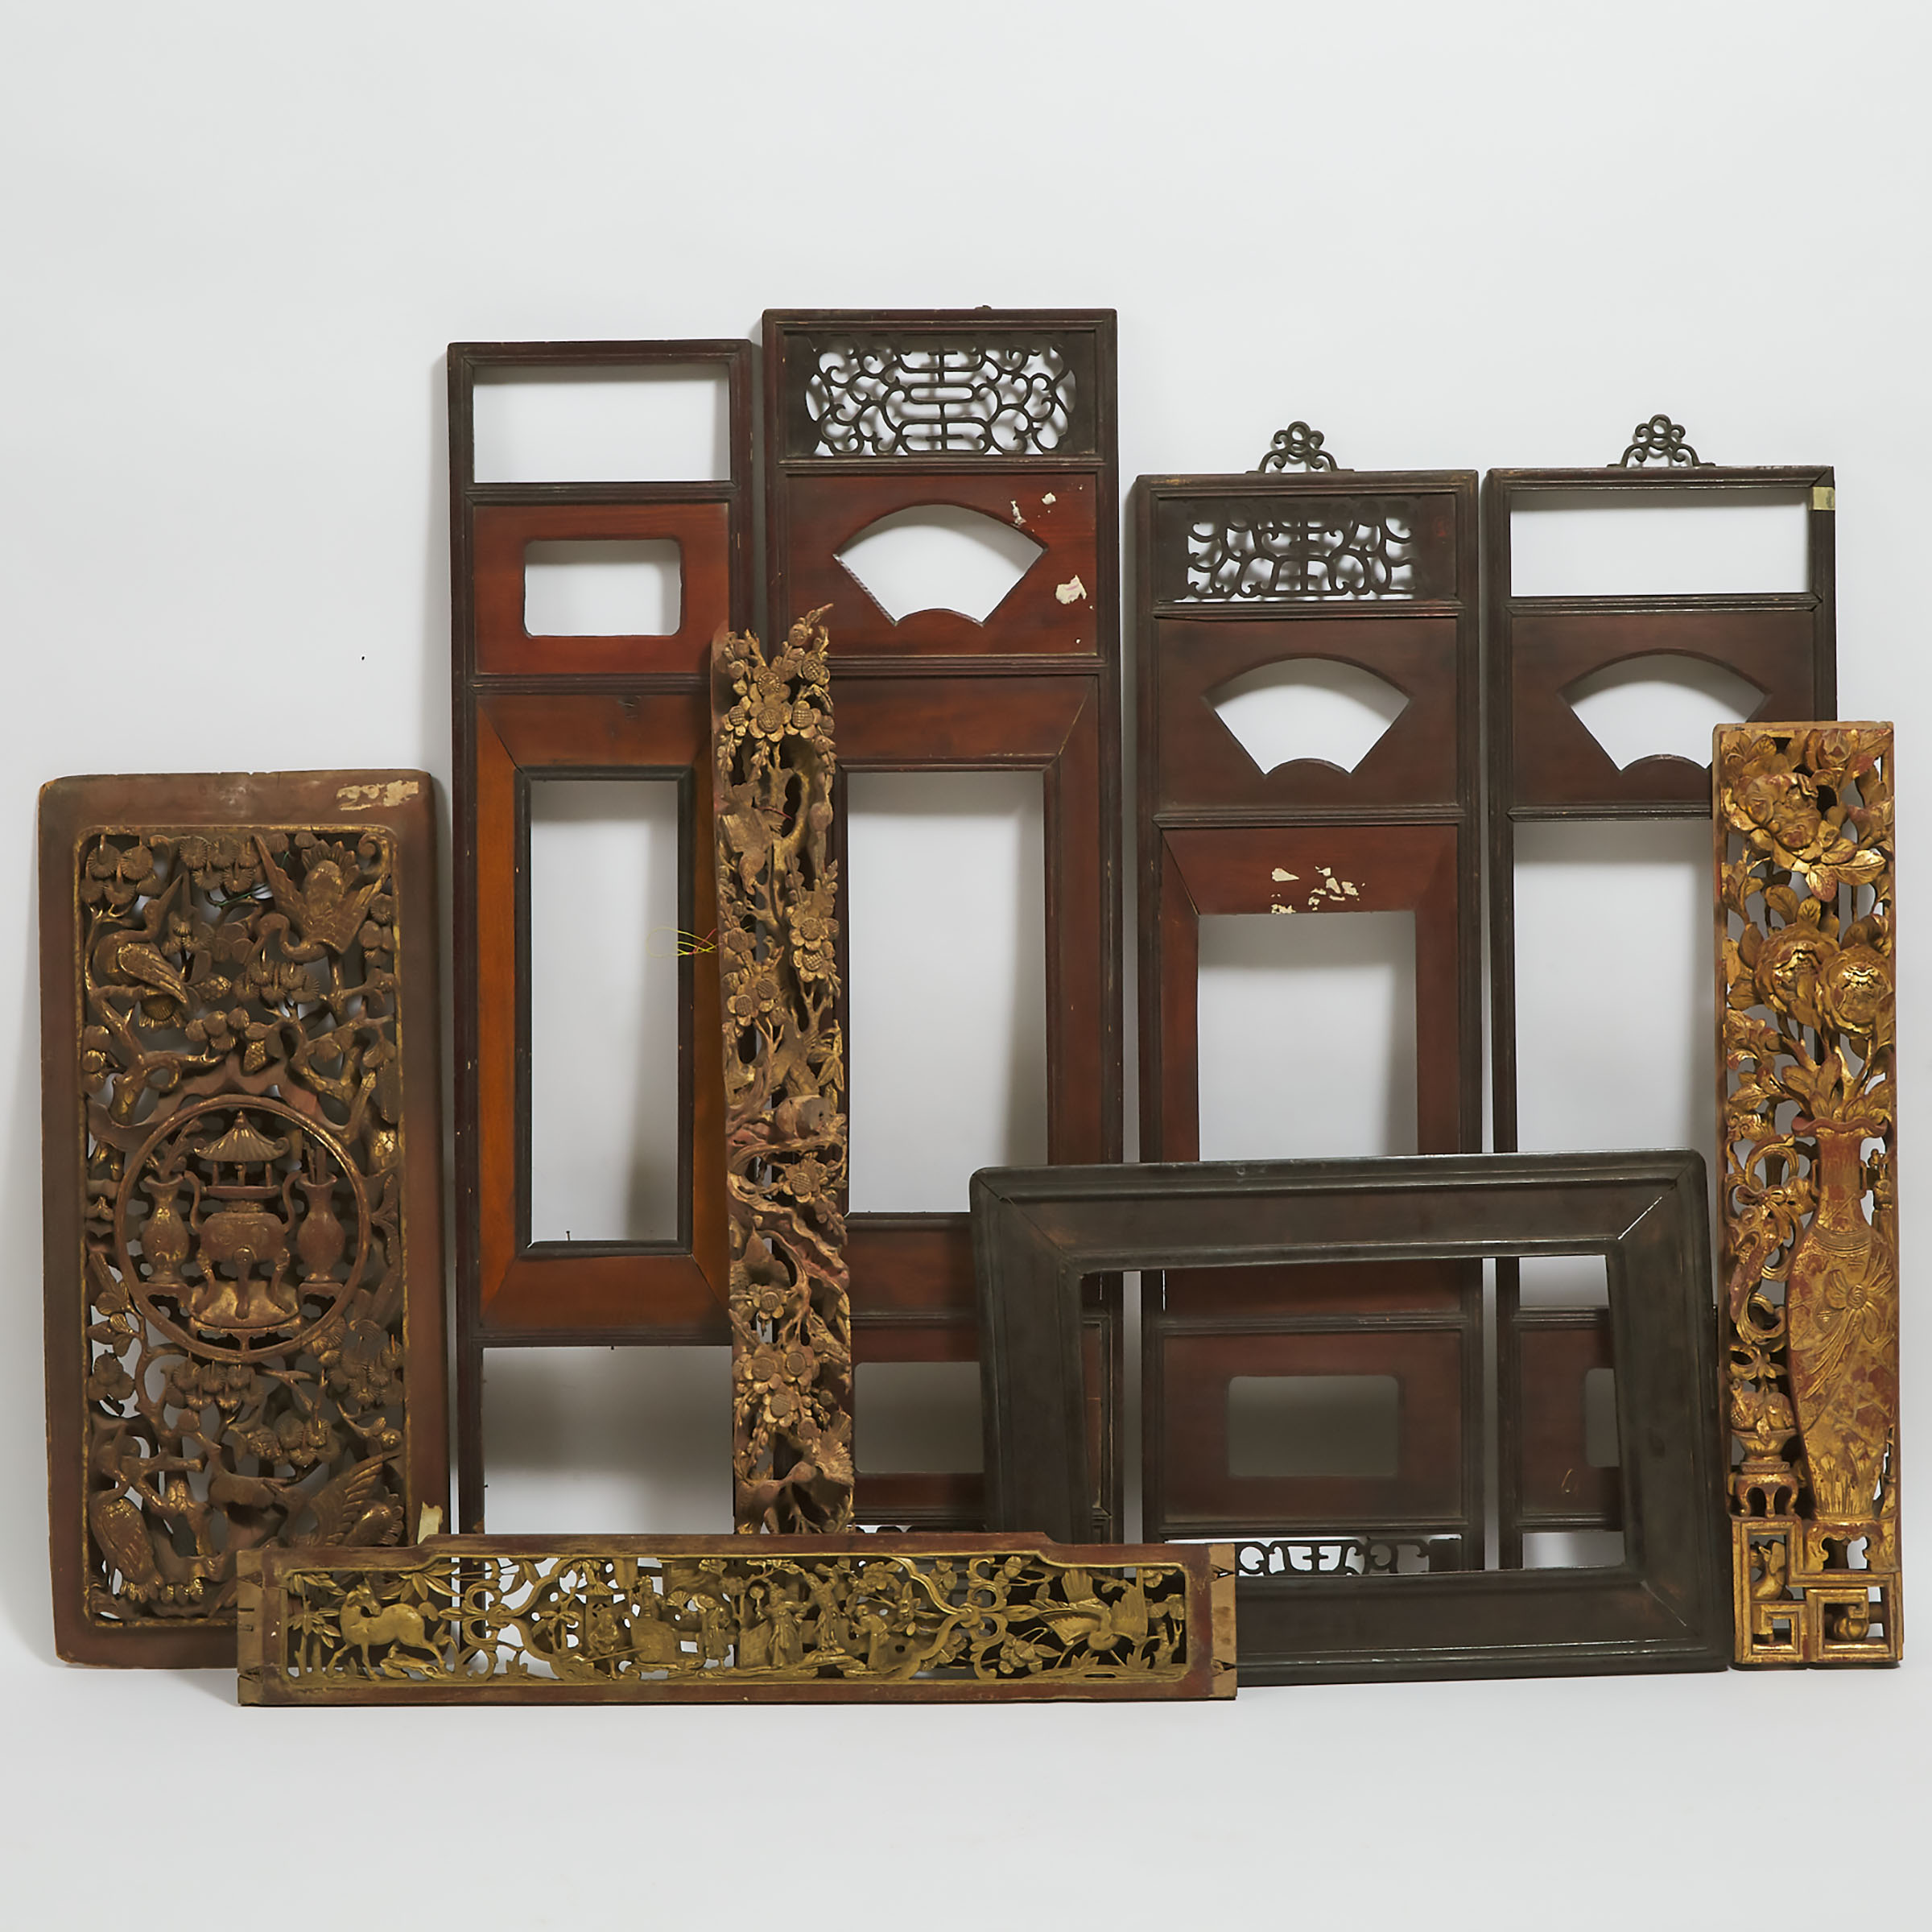 A Group of Nine Chinese Wood Temple Carvings and Frames, 19th/20th Century